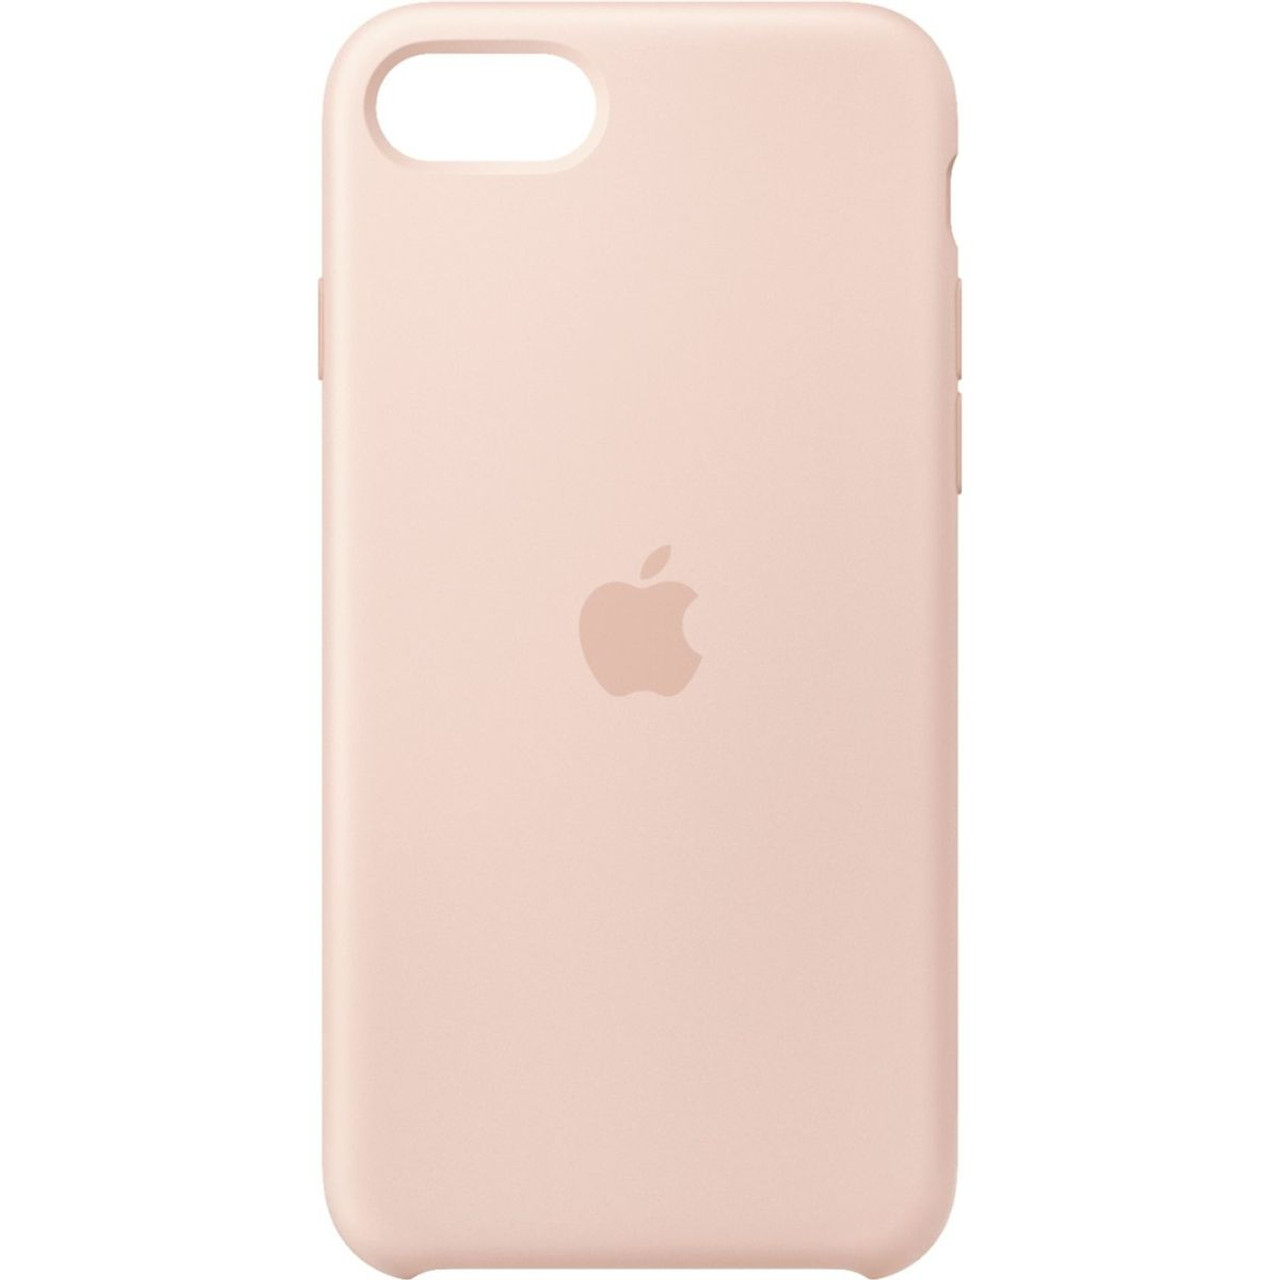 Apple iPhone SE Silicone Case (MXYK2ZM/A) product image